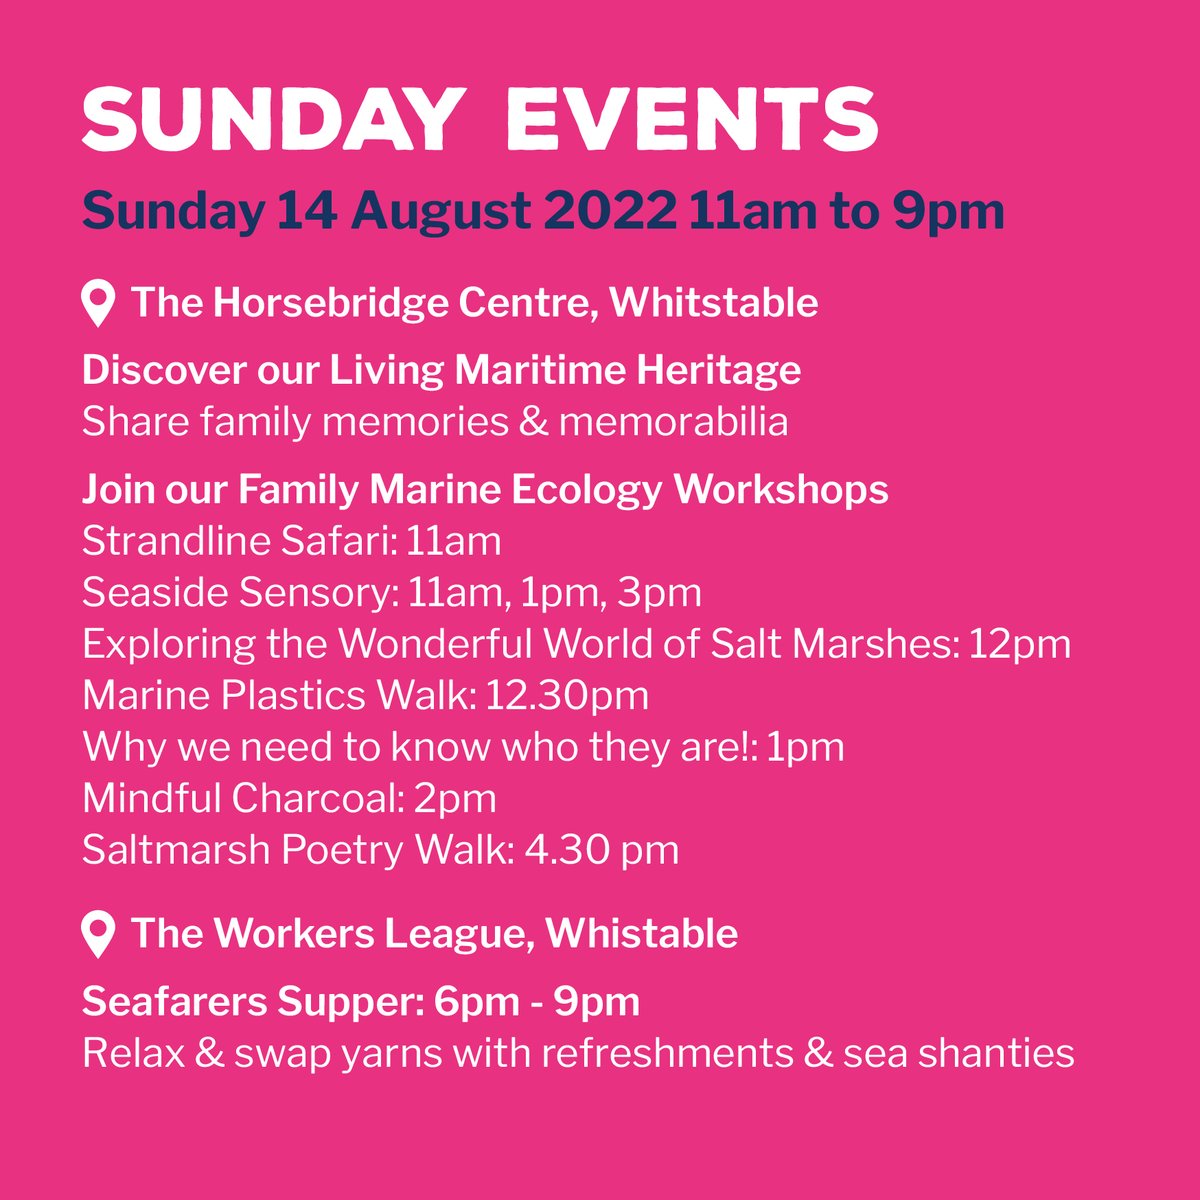 It's getting closer to Sunday 14th August, when FREE family marine ecology activities are coming to @thehorsebridge in collaboration with @WhitstableMari1 and @PloverRovers ! Still places available to book